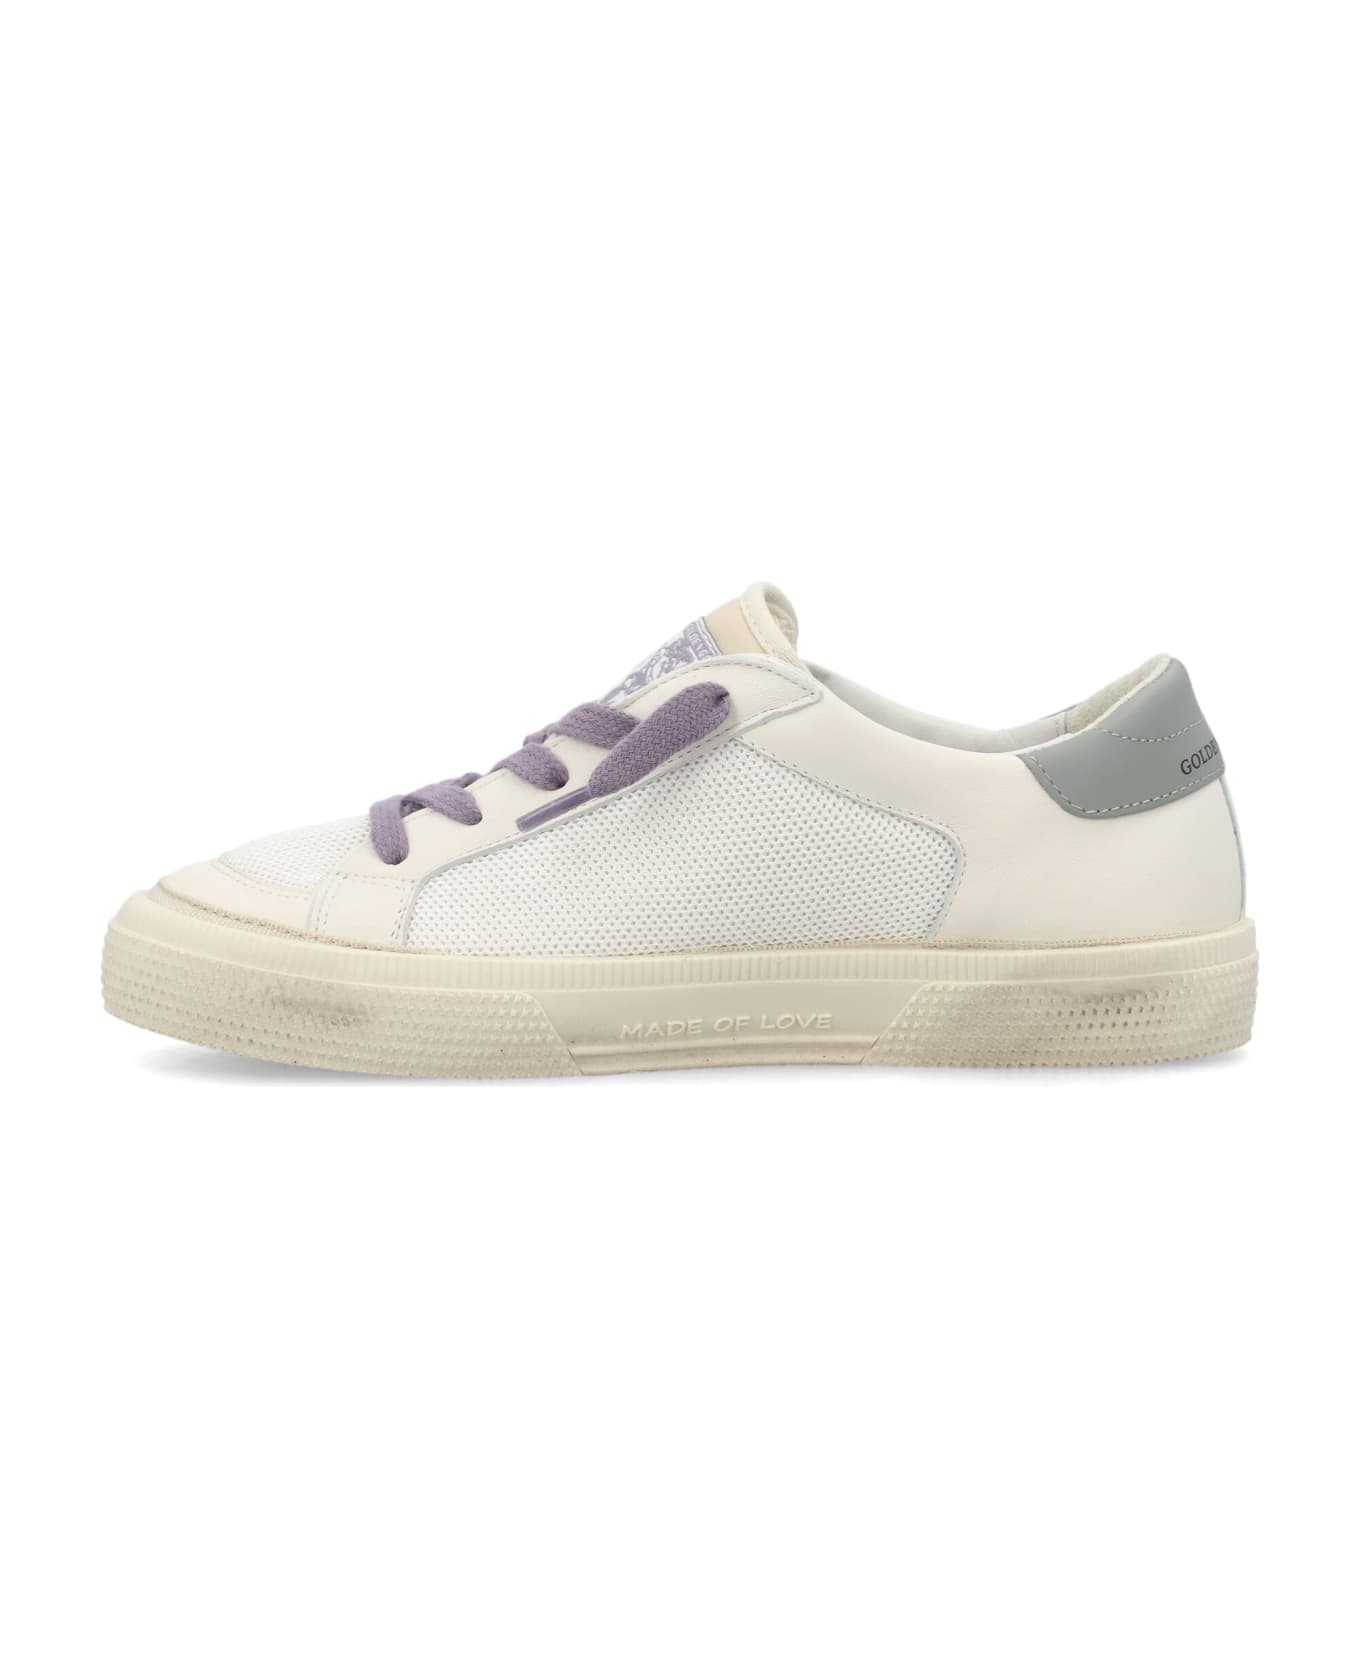 Golden Goose May Sneakers - WHITE/GREY